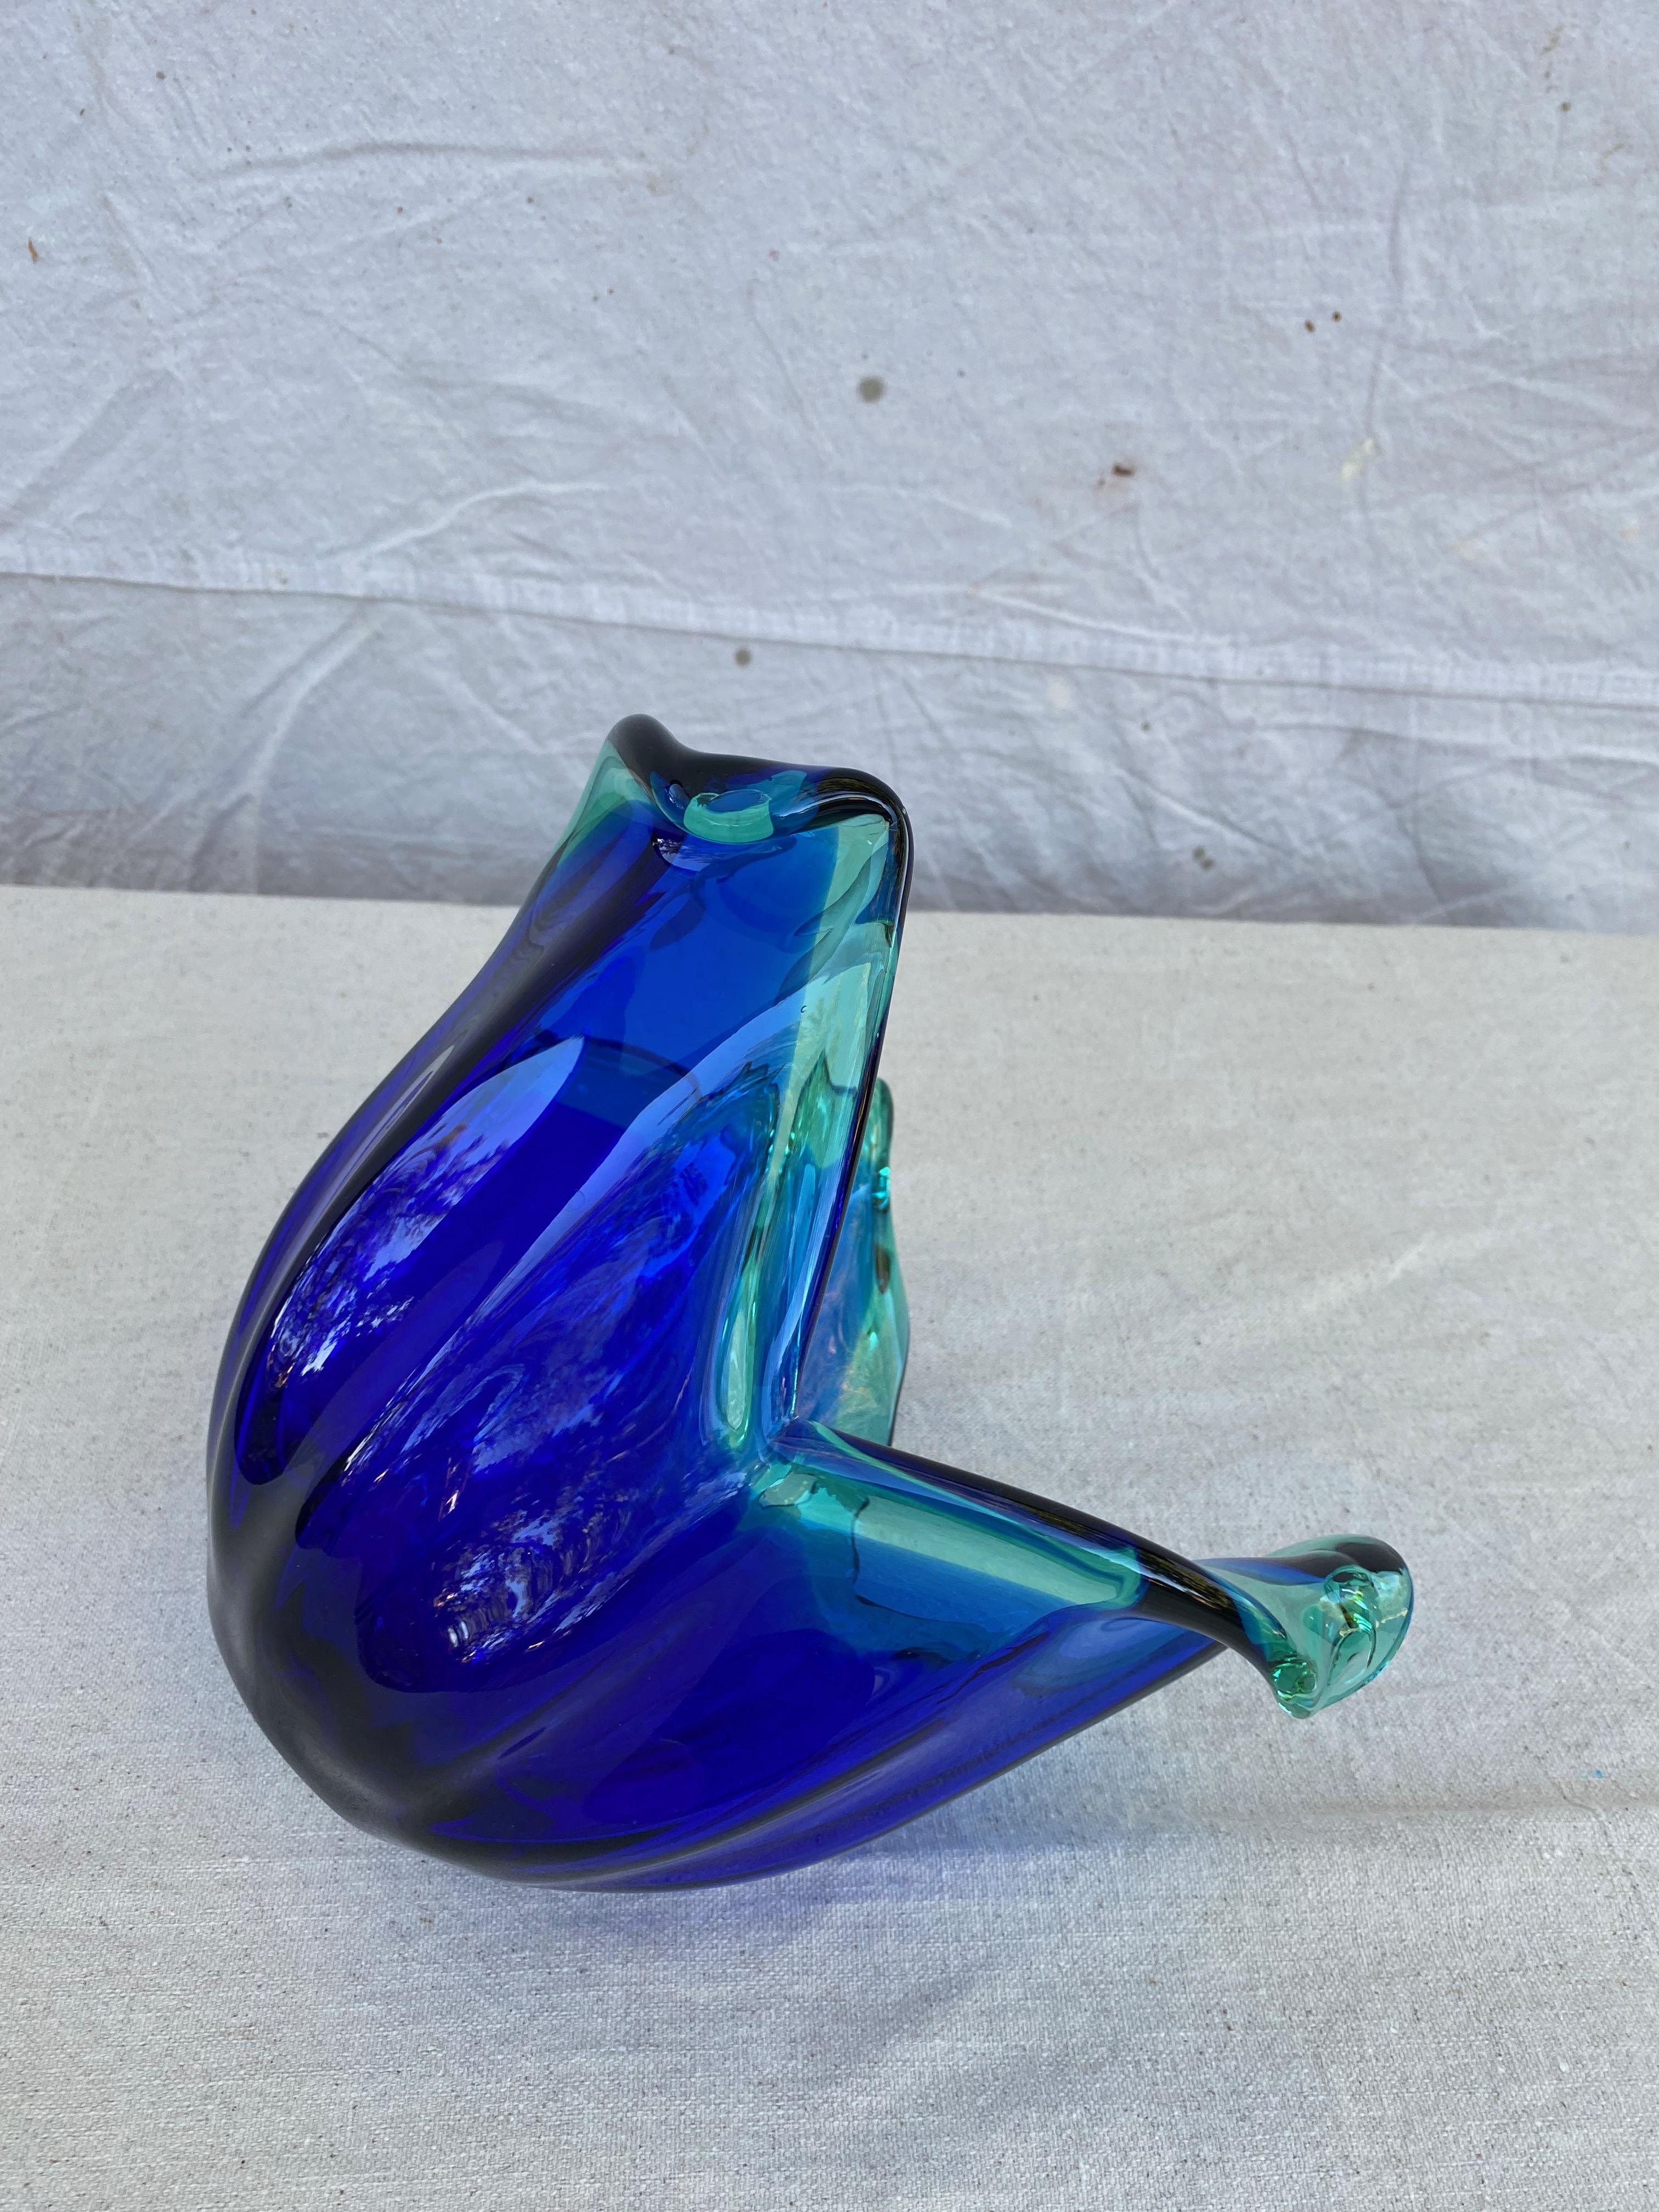 1960s Blue Murano with Teal Green Accents Vase 2